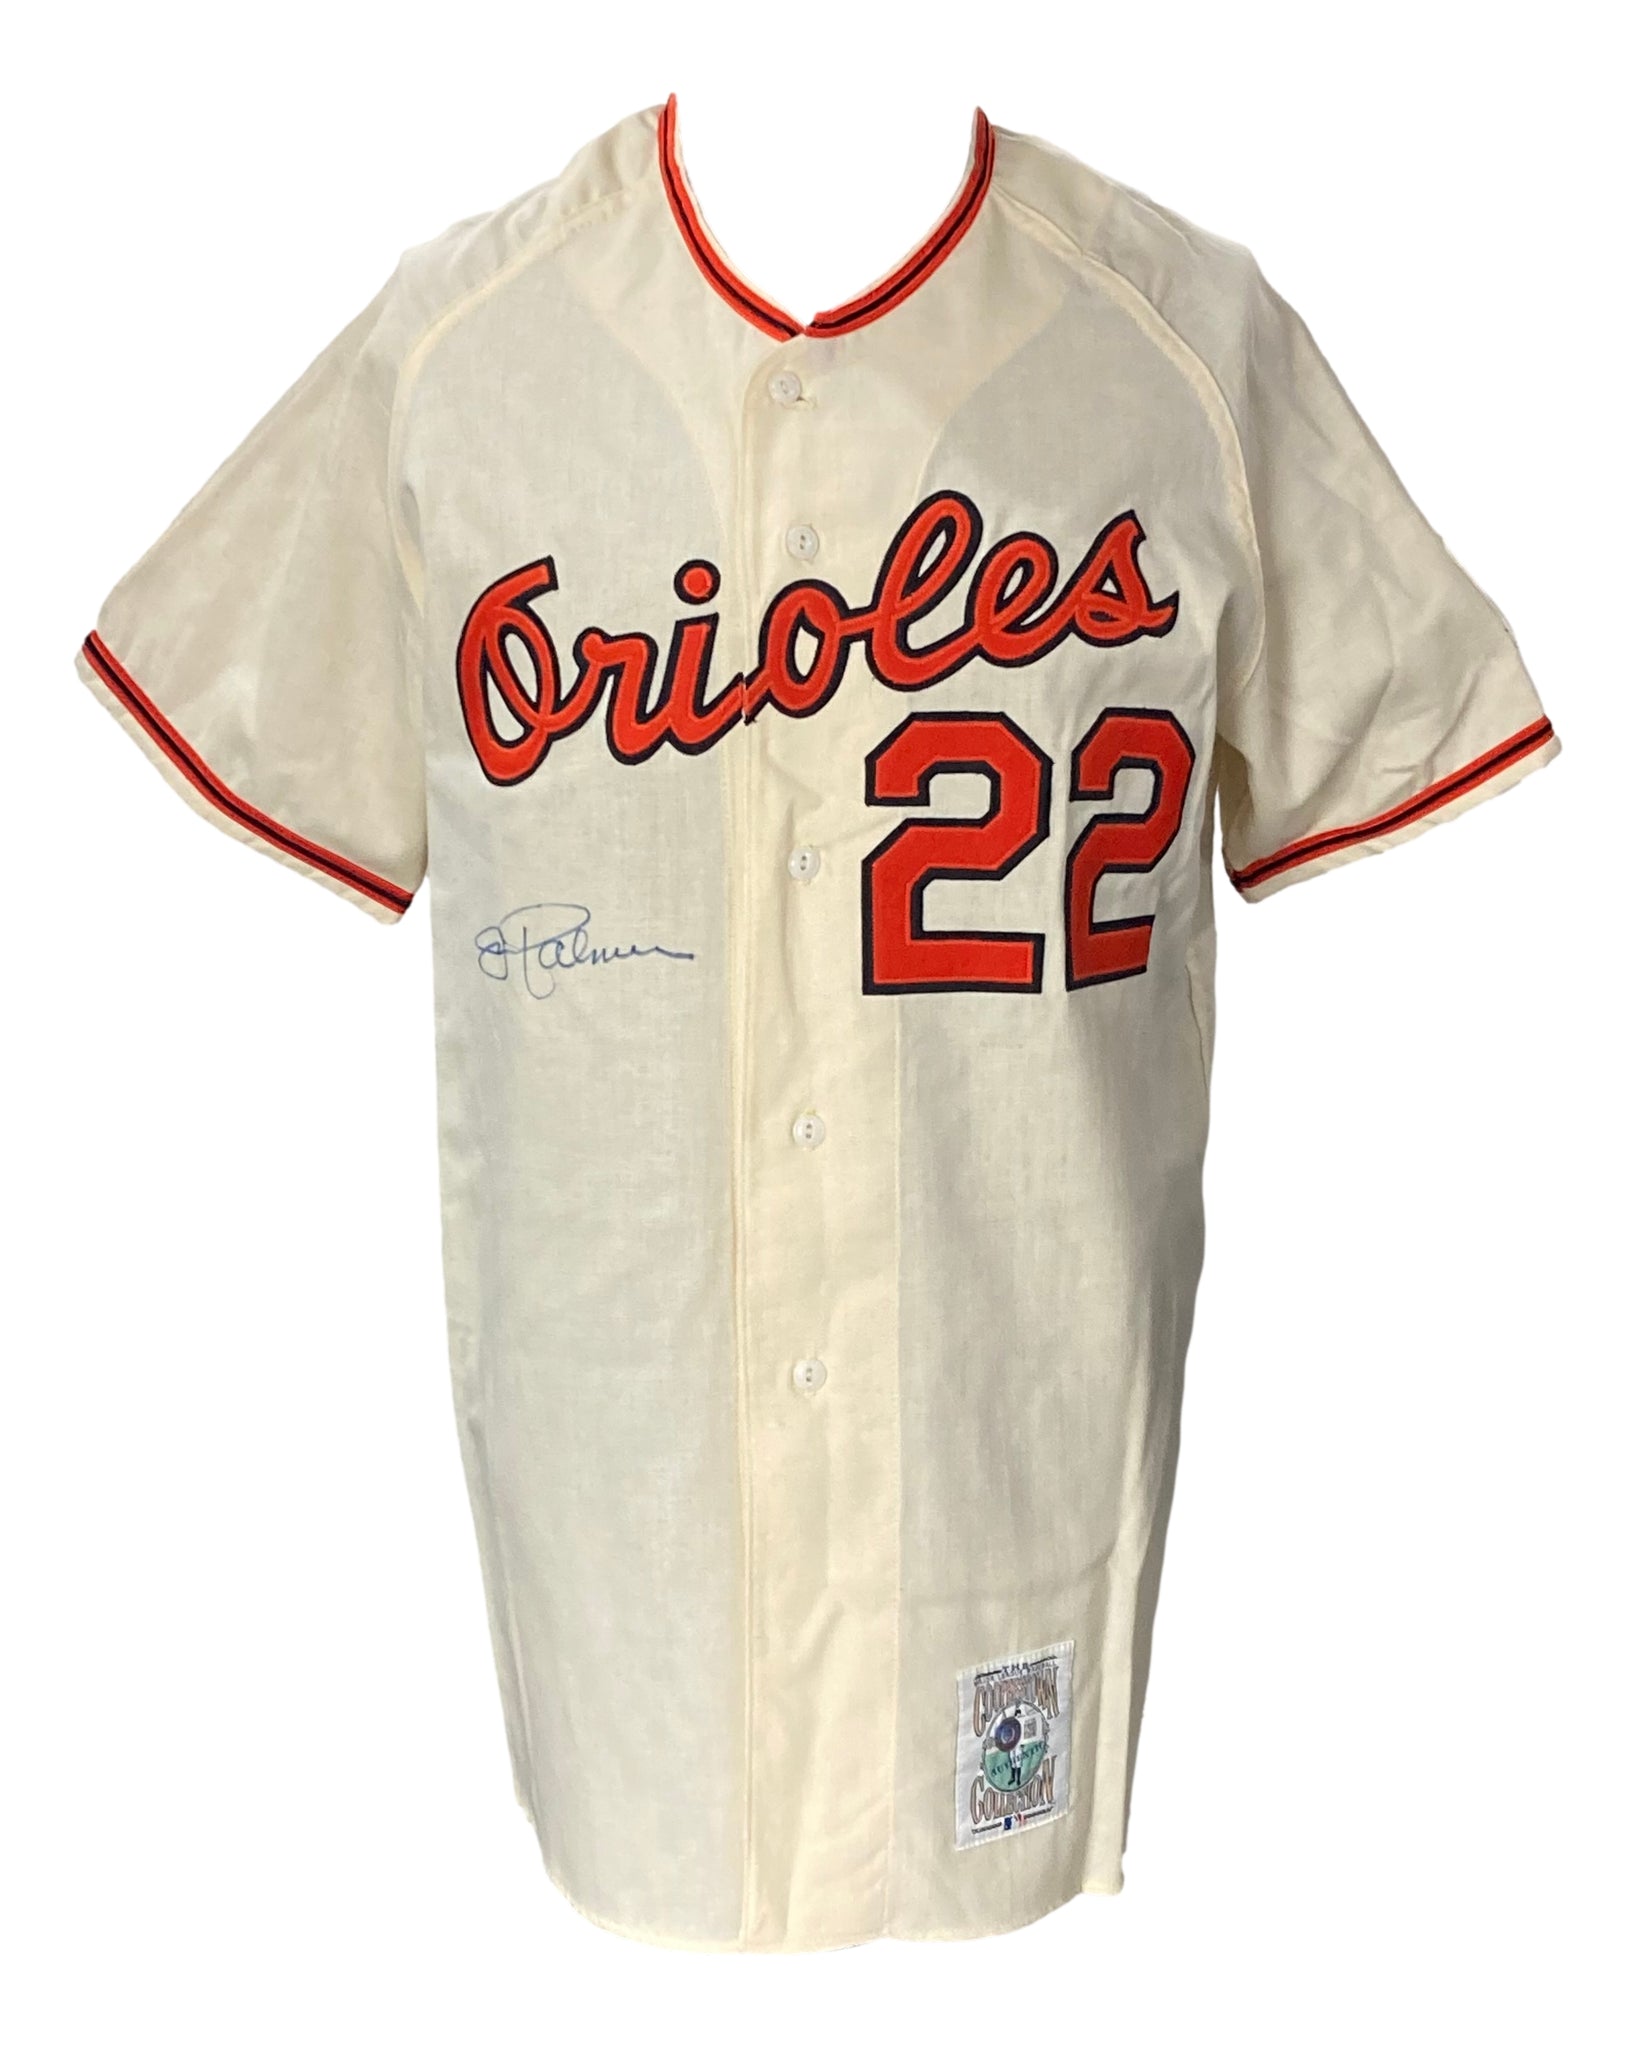 Jim Palmer Signed Baltimore Orioles M&N Cooperstown Collection Jersey